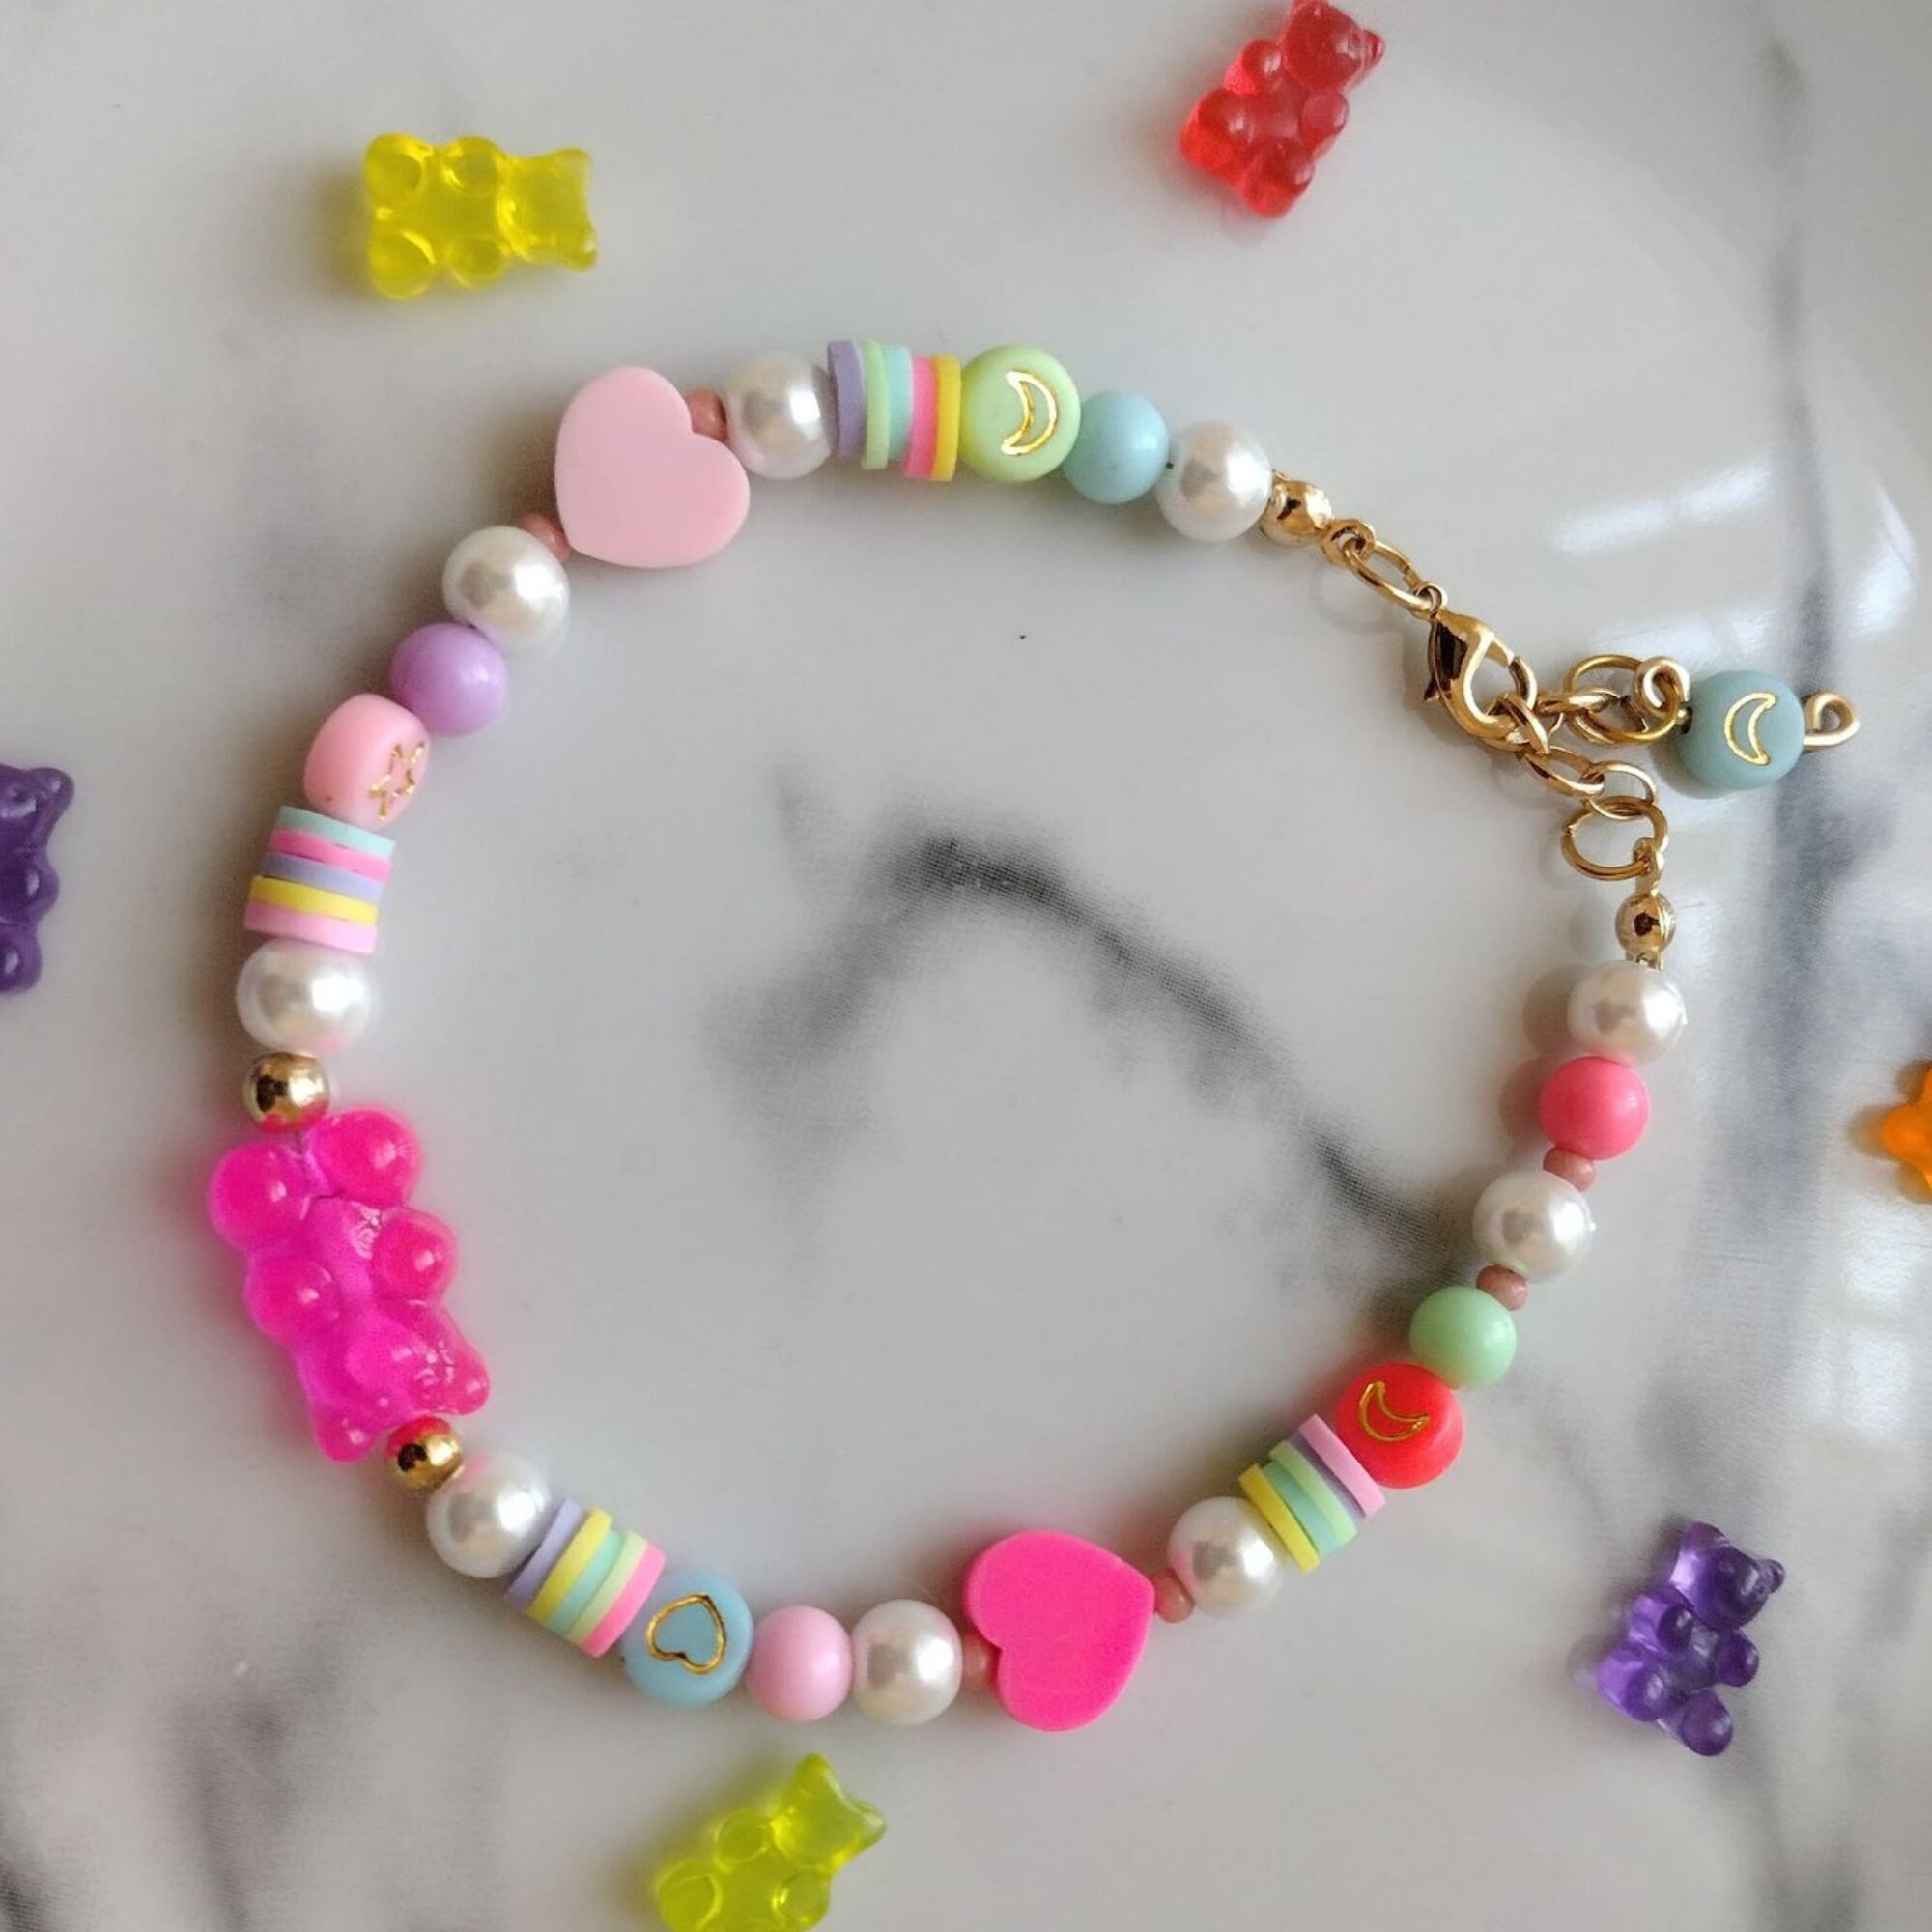 Gummy Bear Candy Bracelets with Cute Acrylic Hearts and Candy Coloured Beads, Freshwater Pearls and opalite. Kawaii Jewellery.